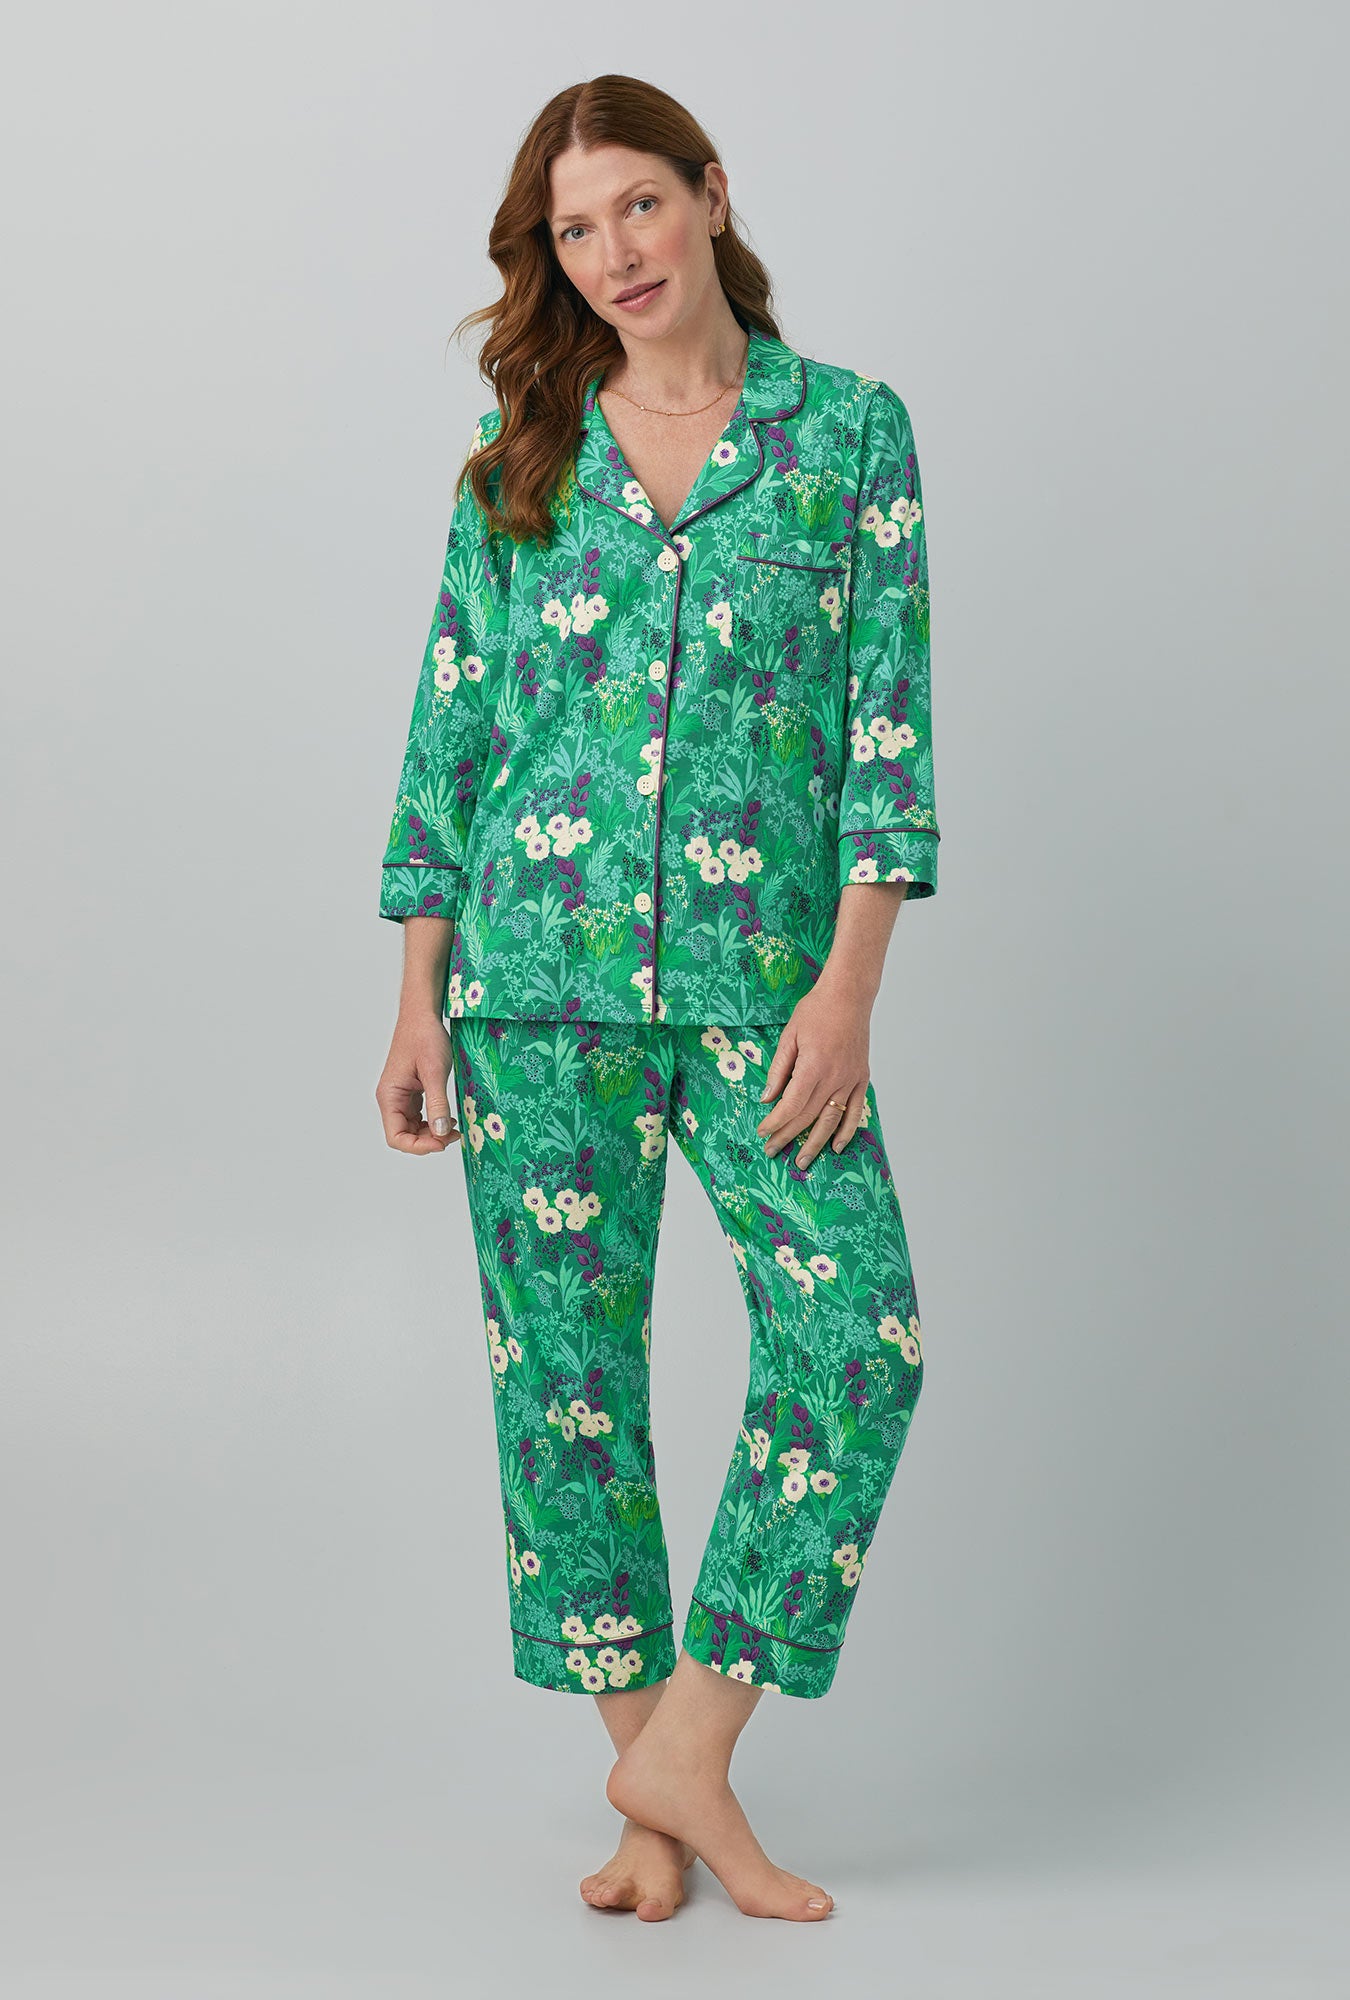 A lady wearing green  3/4 Sleeve Classic Stretch Jersey Cropped PJ Set with Wintergreens  print